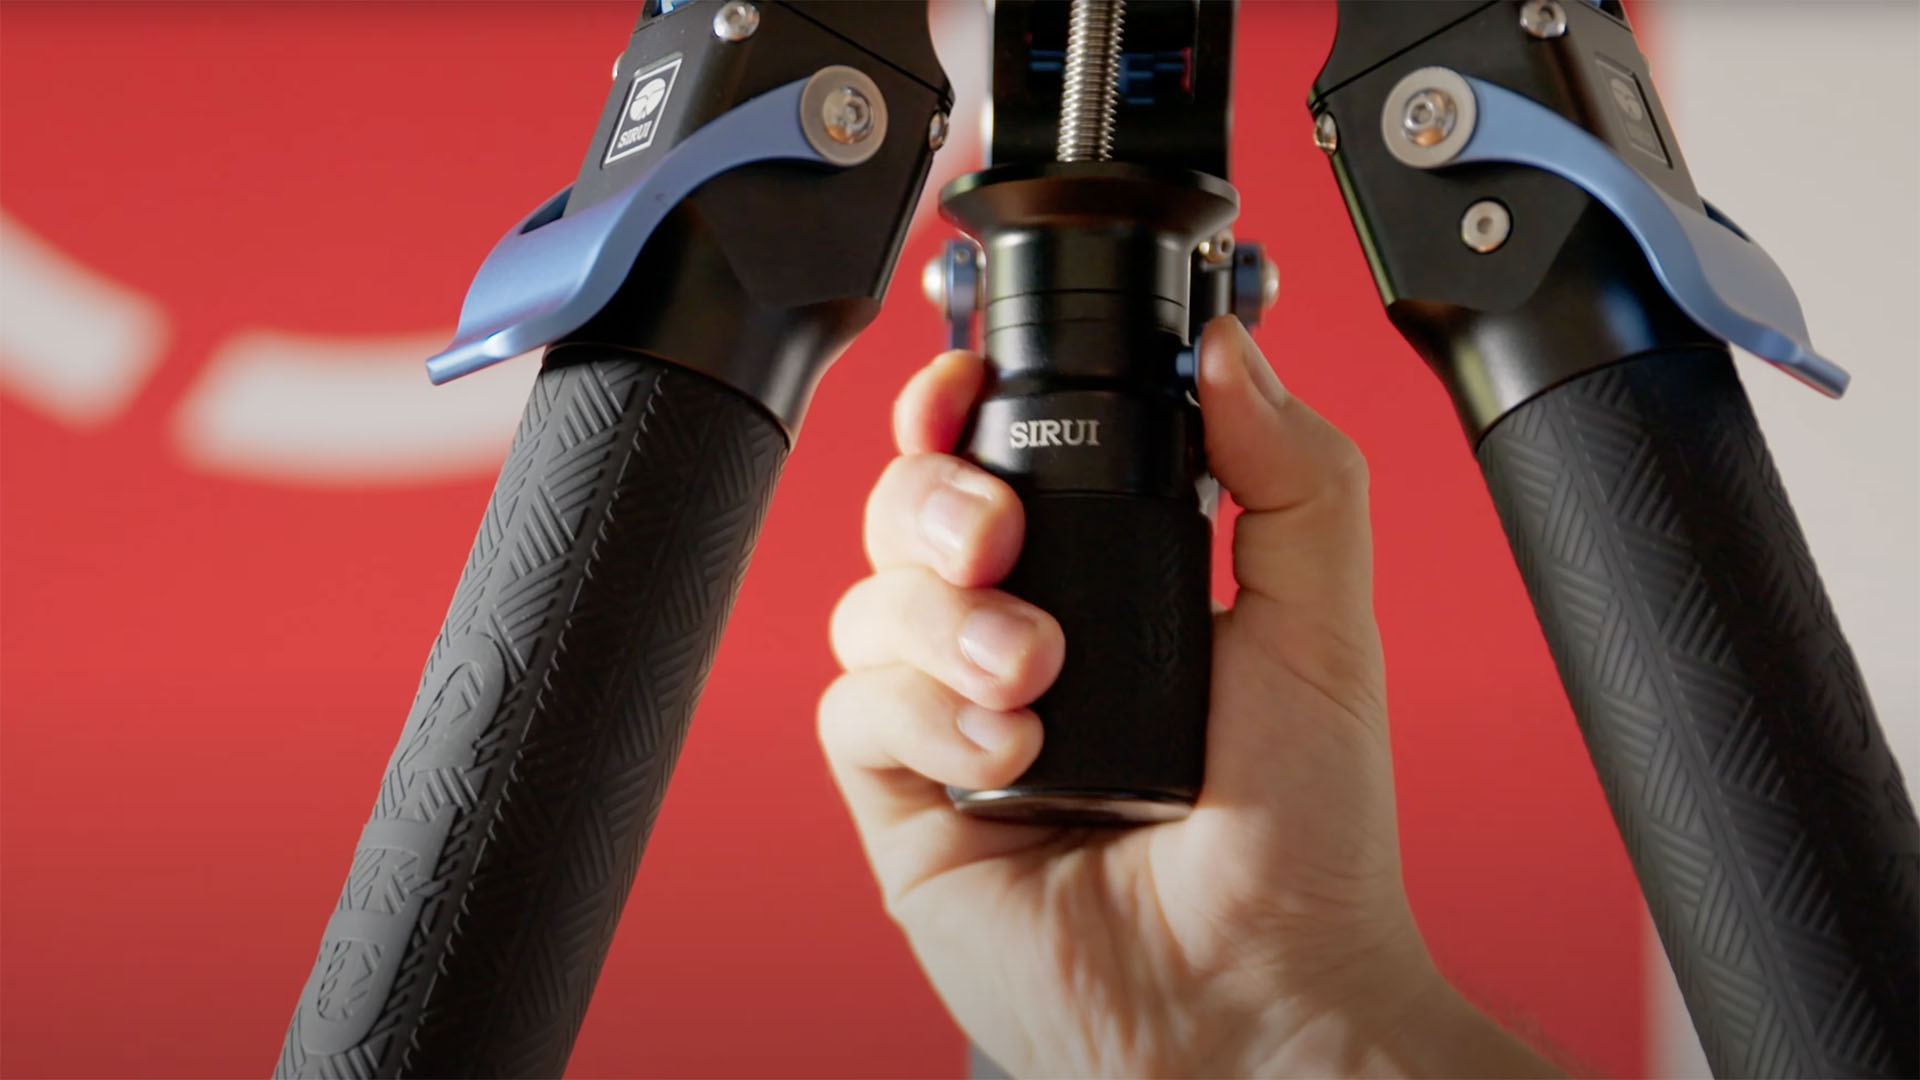 SIRUI SVT75 Rapid Tripod System Review - Affordable Quick-Release